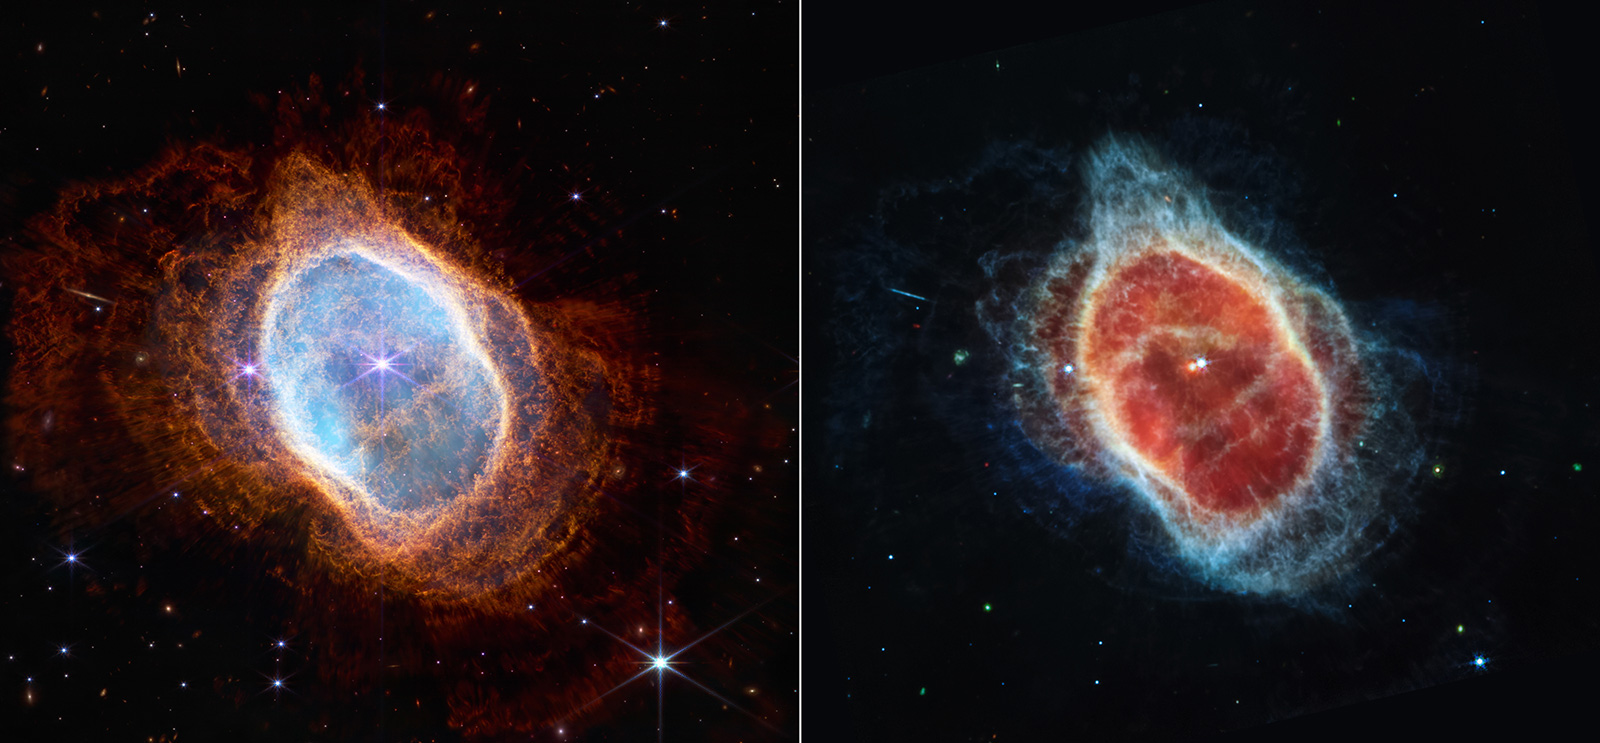 This side-by-side comparison shows observations of the Southern Ring Nebula in near-infrared light, at left, and mid-infrared light, at right, from NASA’s Webb Telescope.